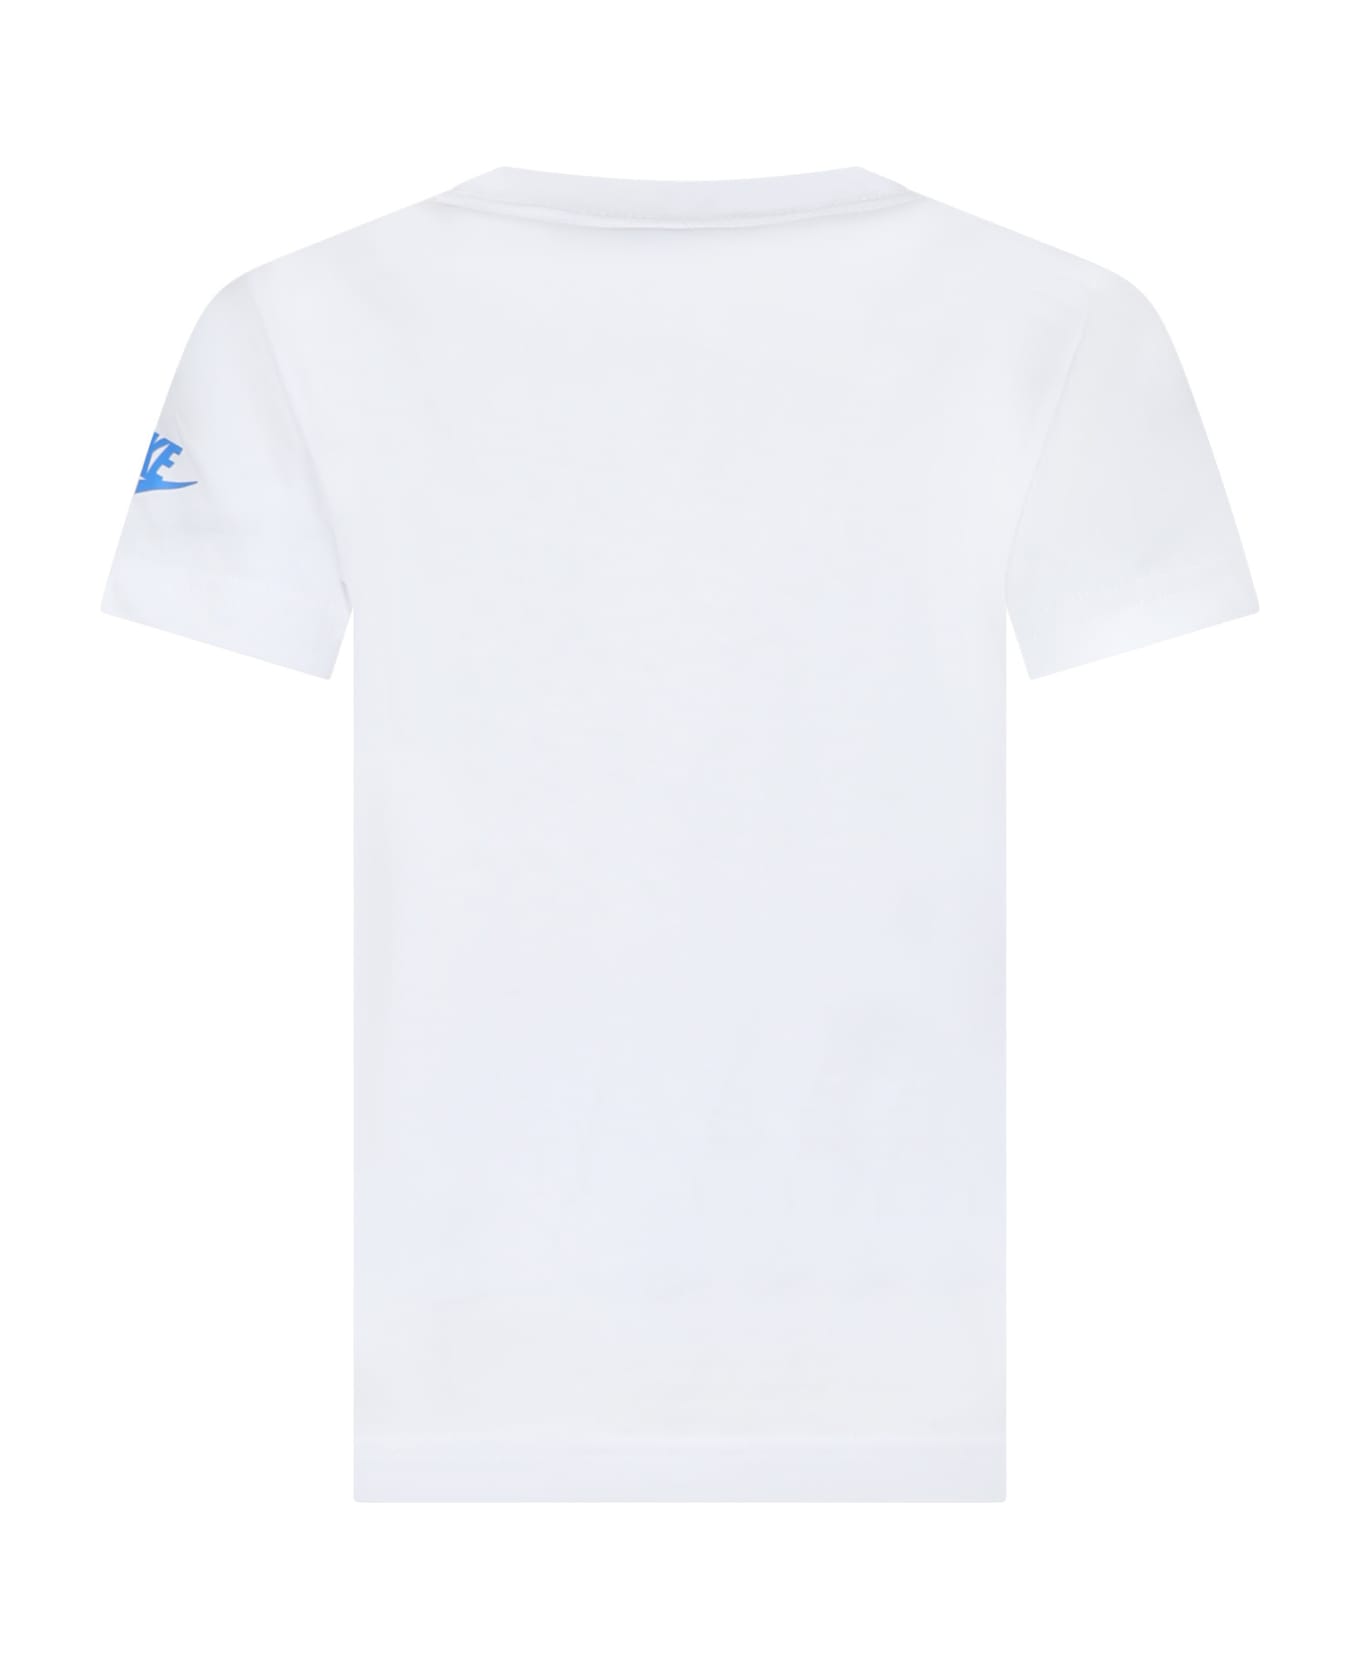 Nike White T-shirt For Boy With Logo - White Tシャツ＆ポロシャツ